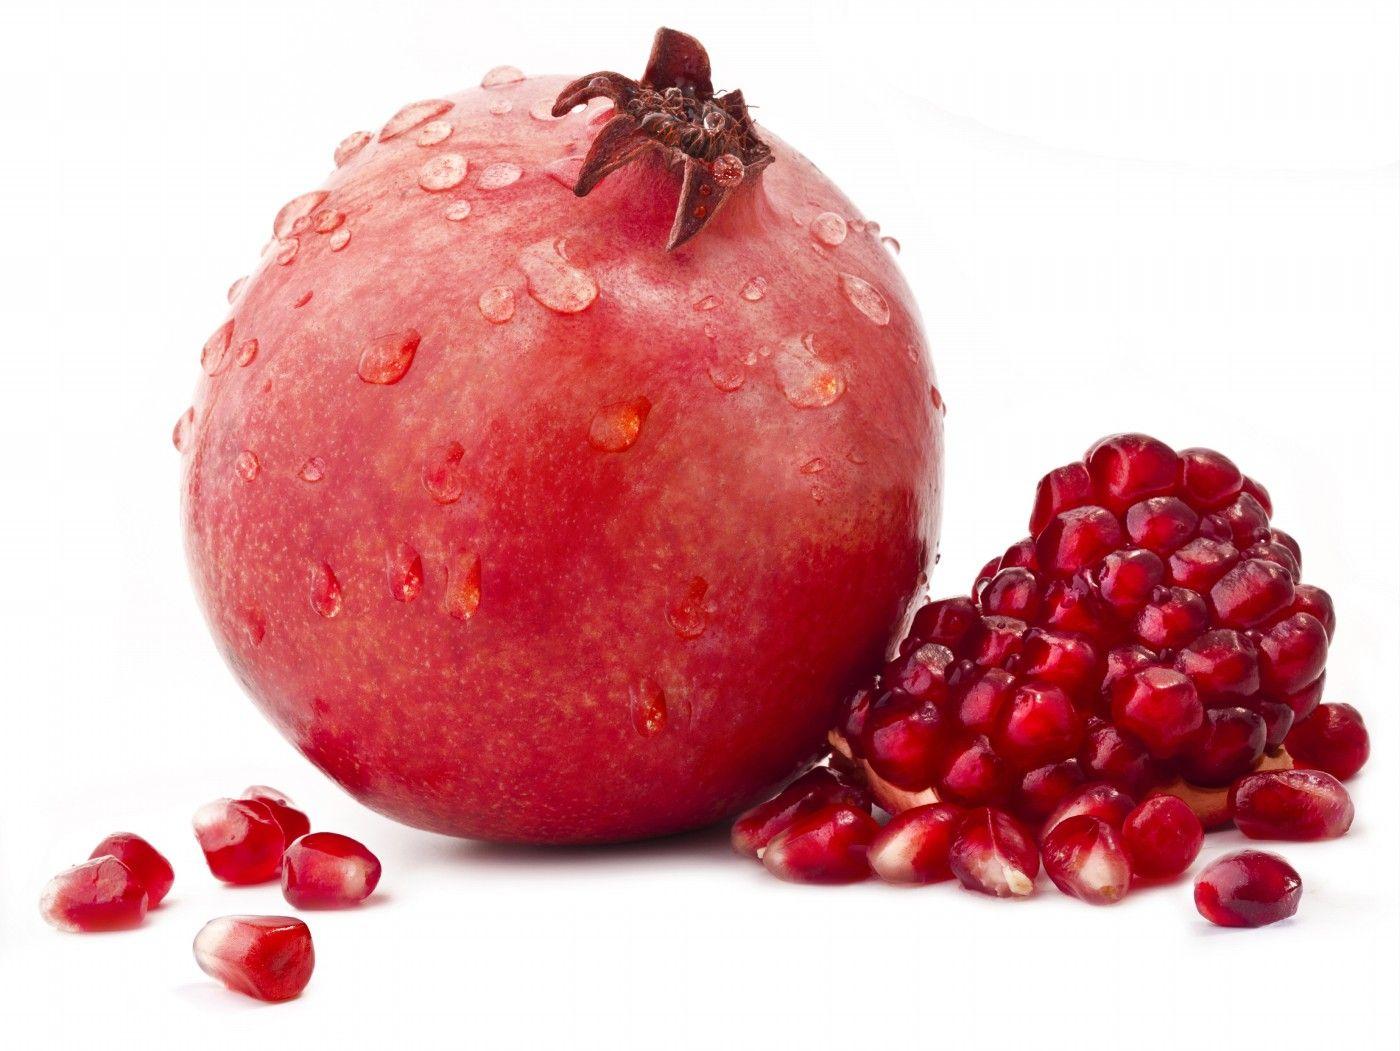 Gallery For > Pomegranate Wallpaper